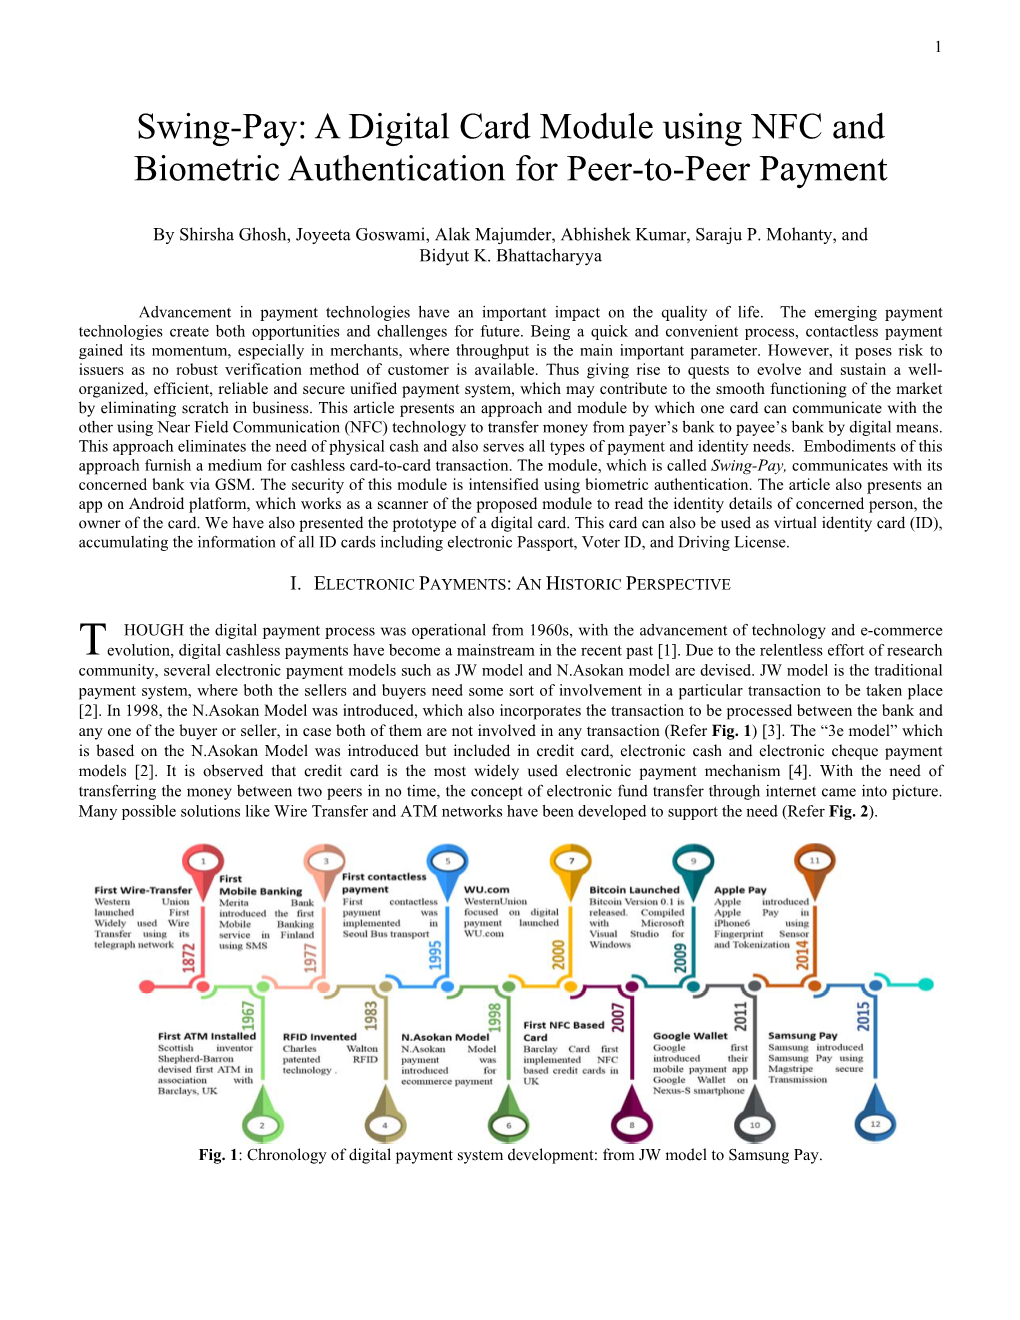 Swing-Pay: a Digital Card Module Using NFC and Biometric Authentication for Peer-To-Peer Payment